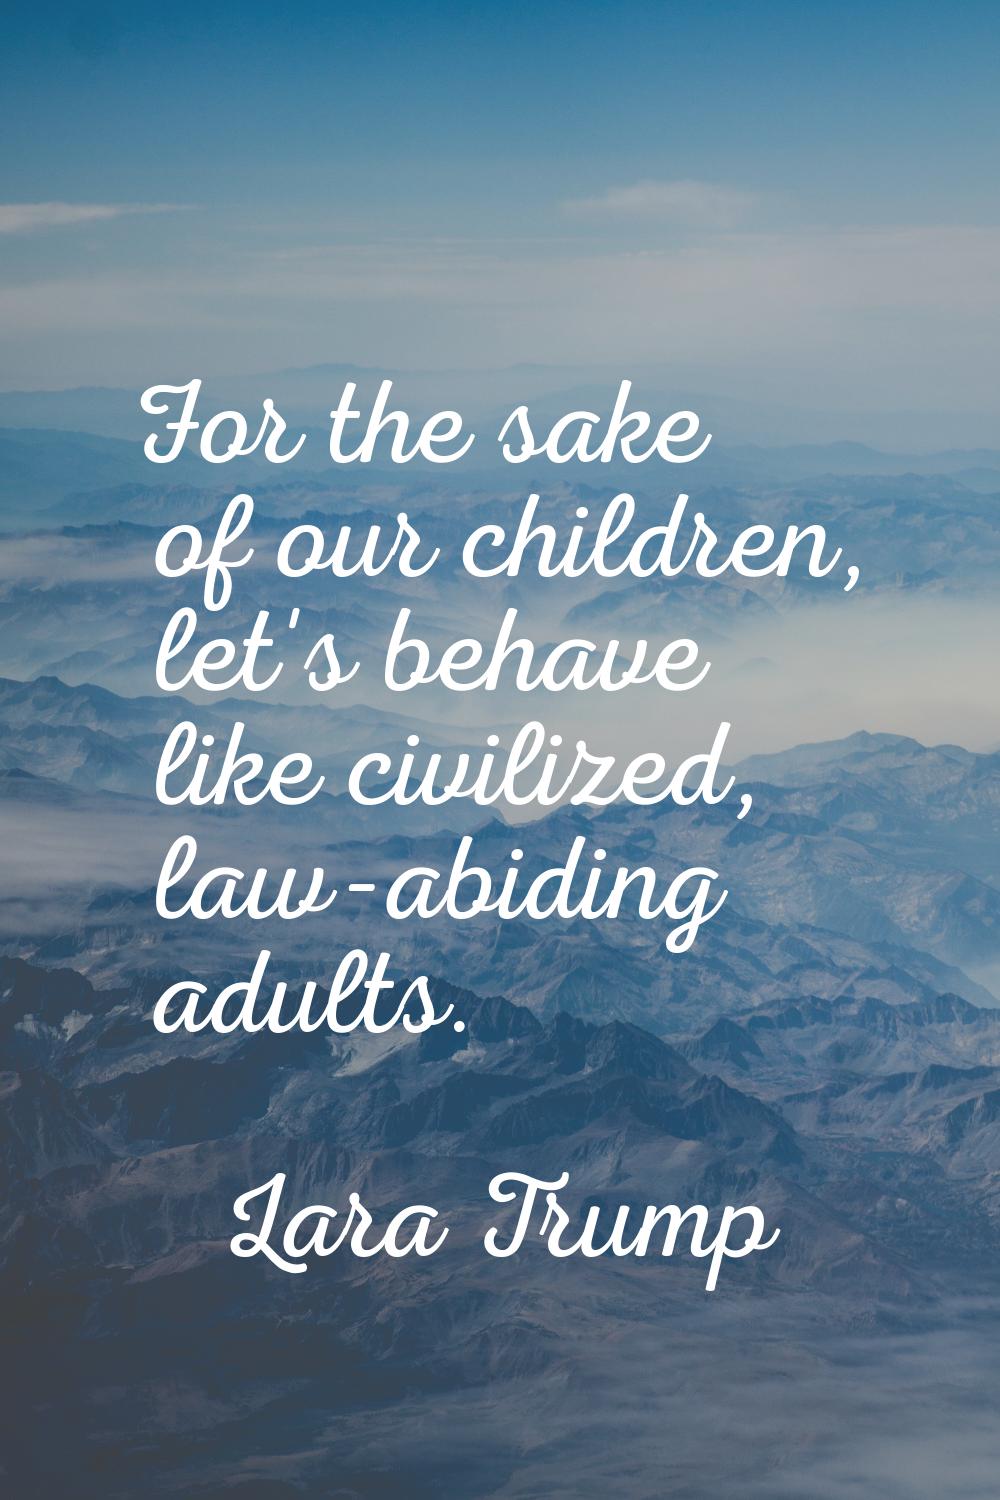 For the sake of our children, let's behave like civilized, law-abiding adults.